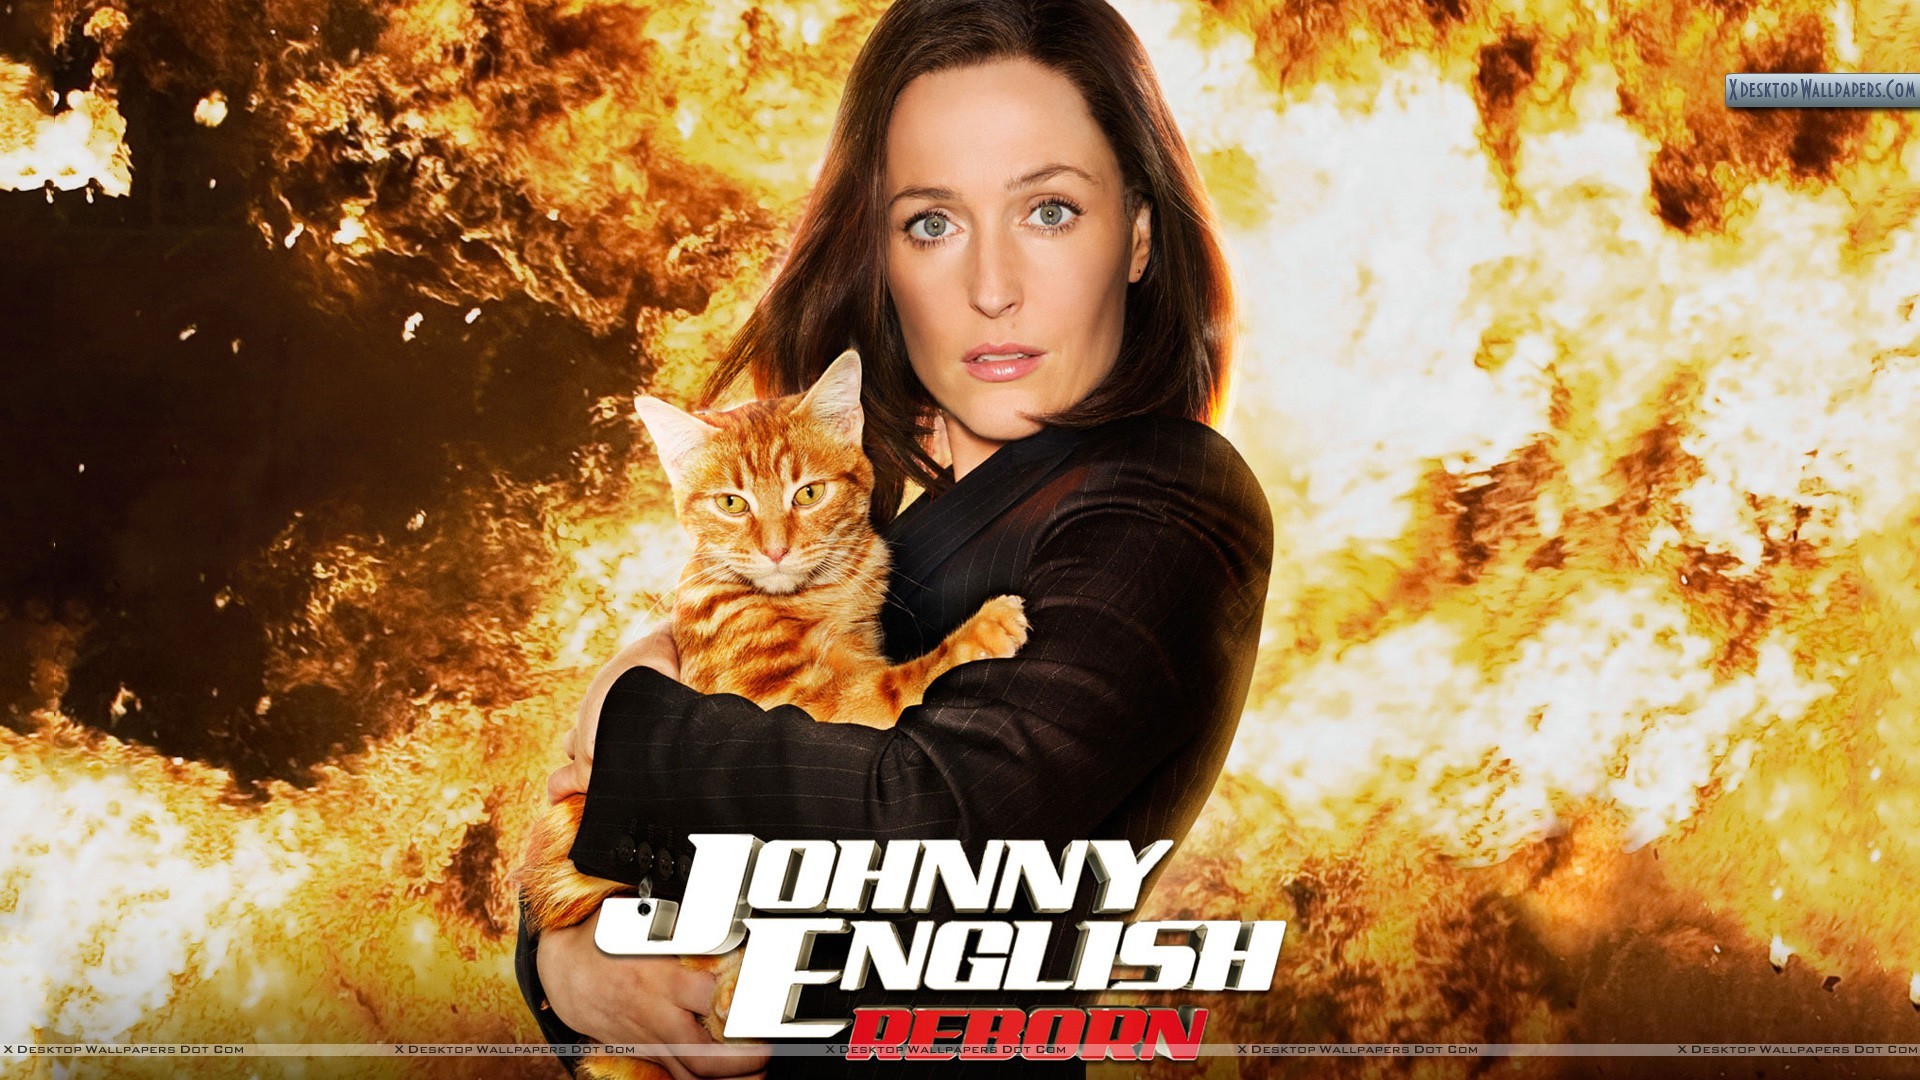 1920x1080 You are viewing wallpaper titled "Johnny English Reborn – Gillian Anderson  ...